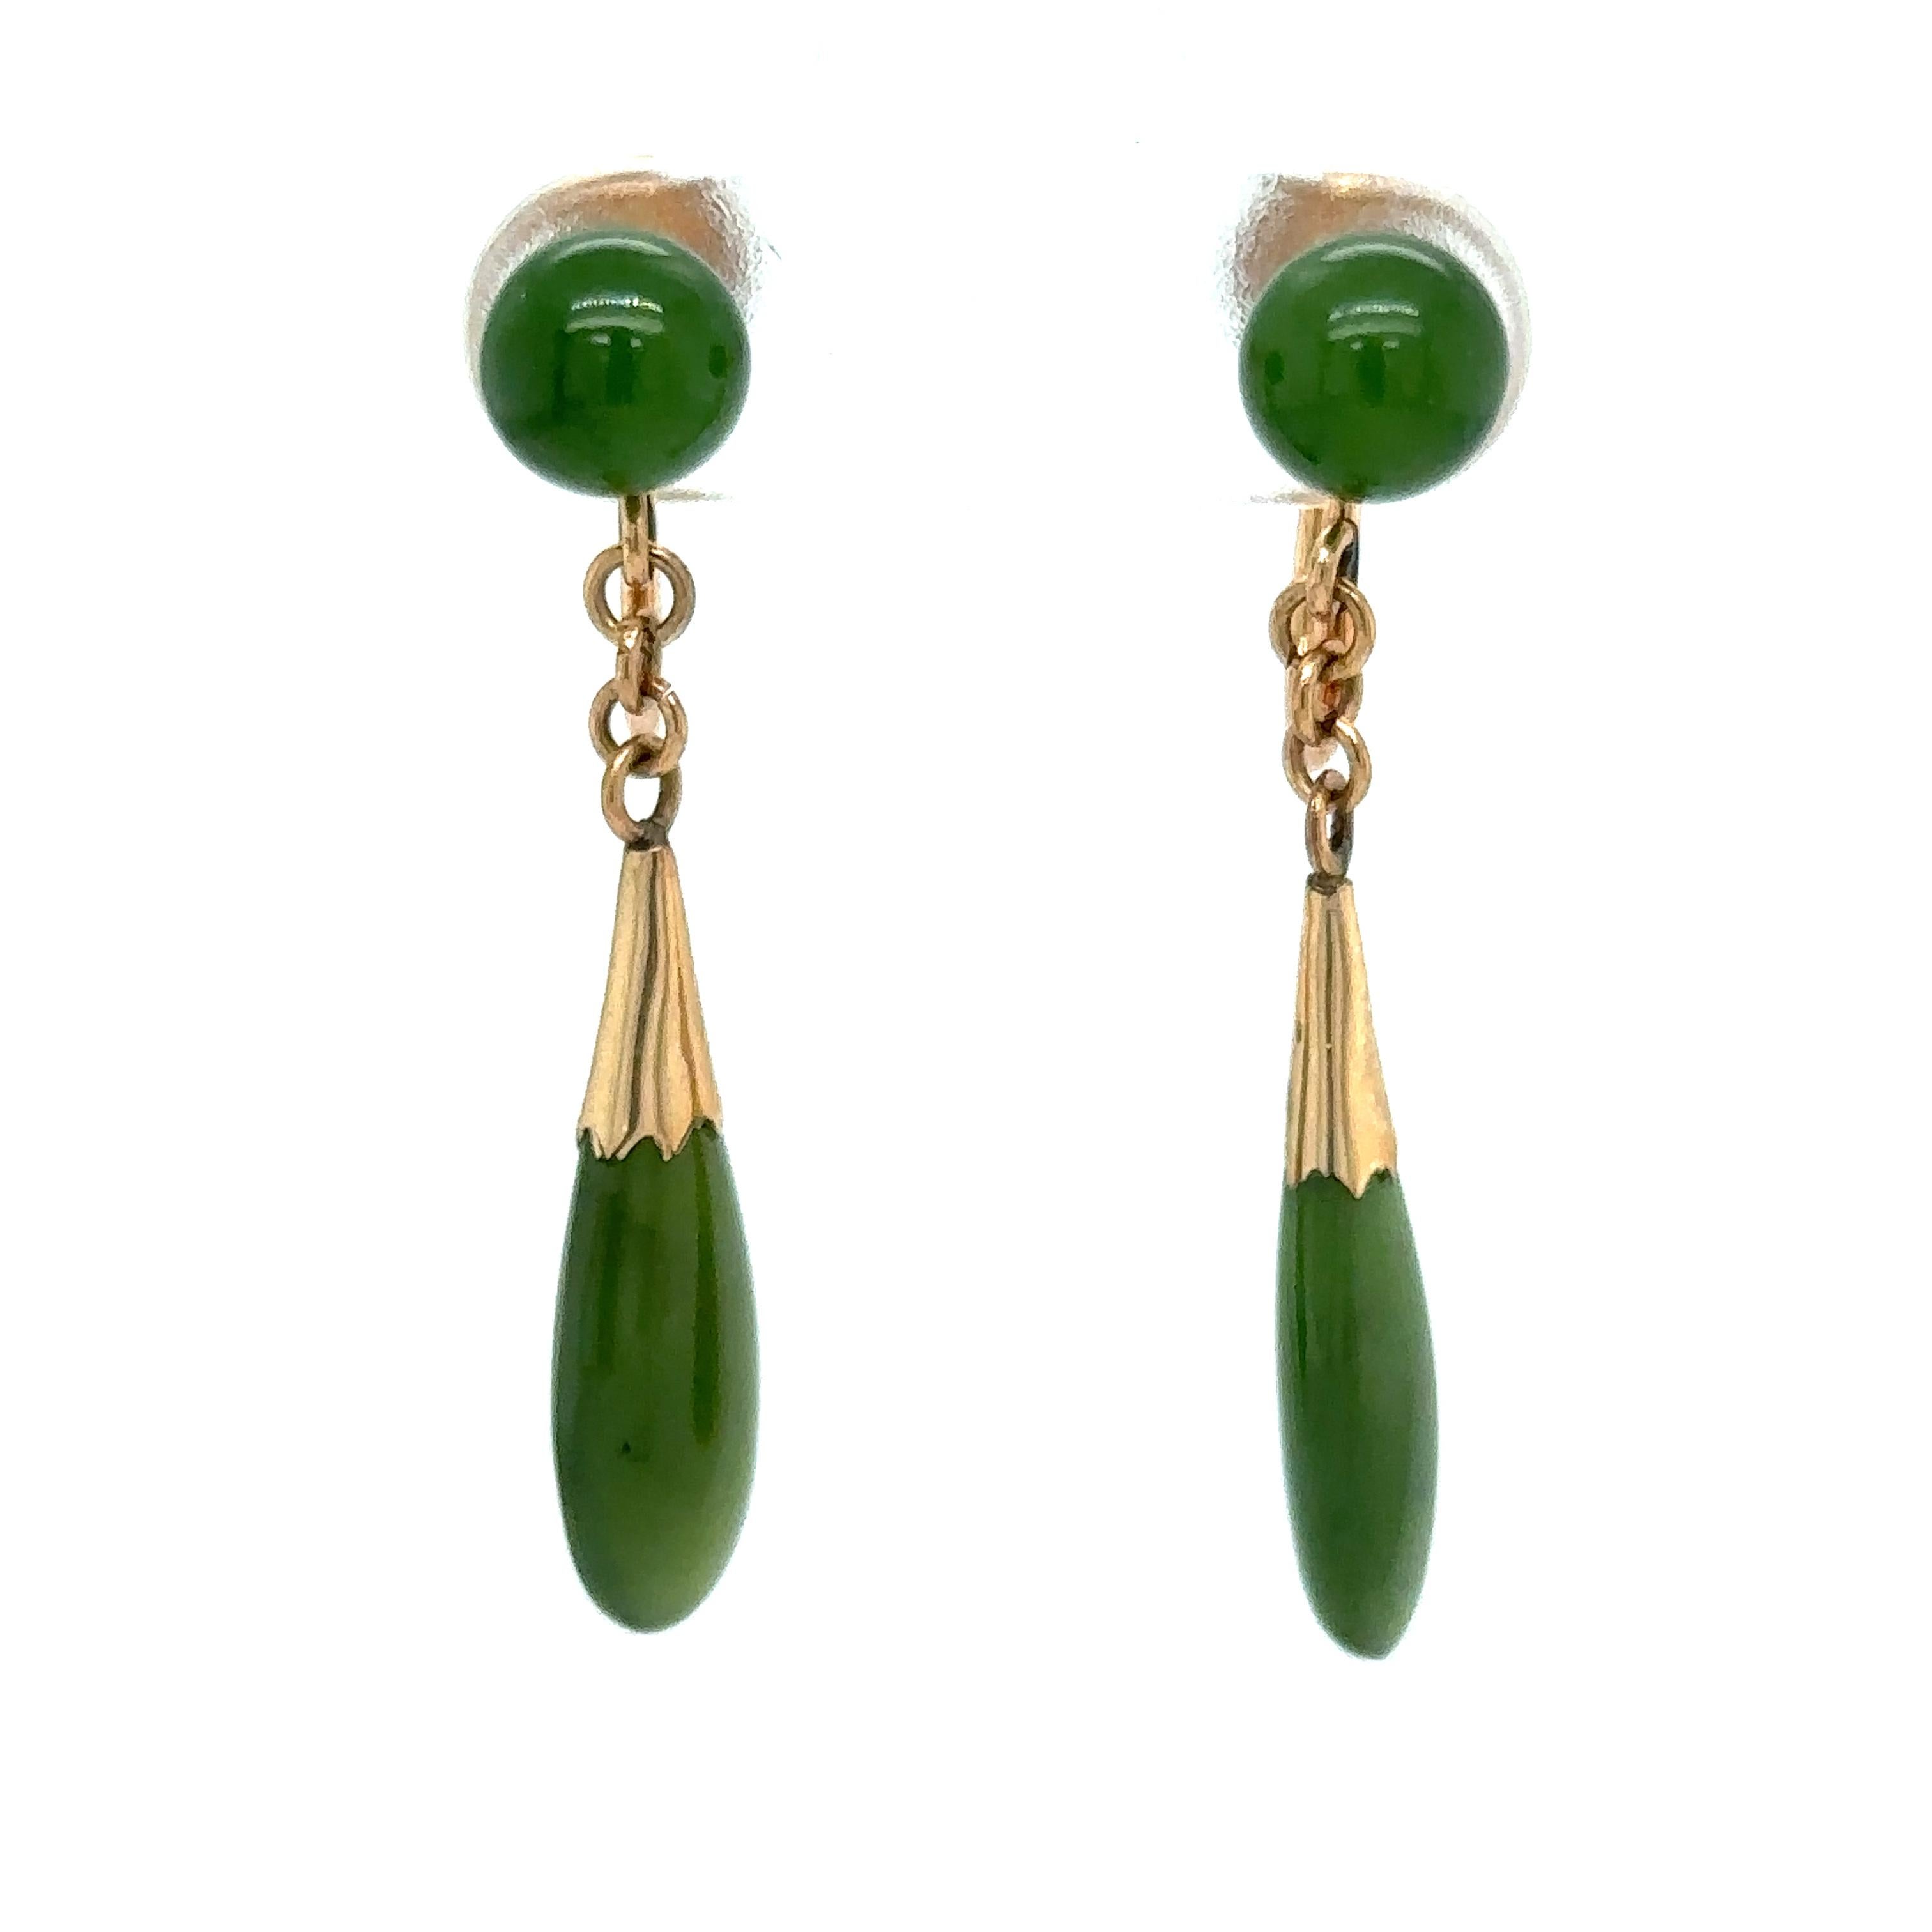 Item Details: These dangle earrings have round jade stones and jade drops with a lush dark green color in a 14k gold setting. These are non-pierced screw back earrings.

Circa: 1960s
Metal Type: 14 Karat Gold
Weight: 3.2 grams
Size: 1 inch Length 